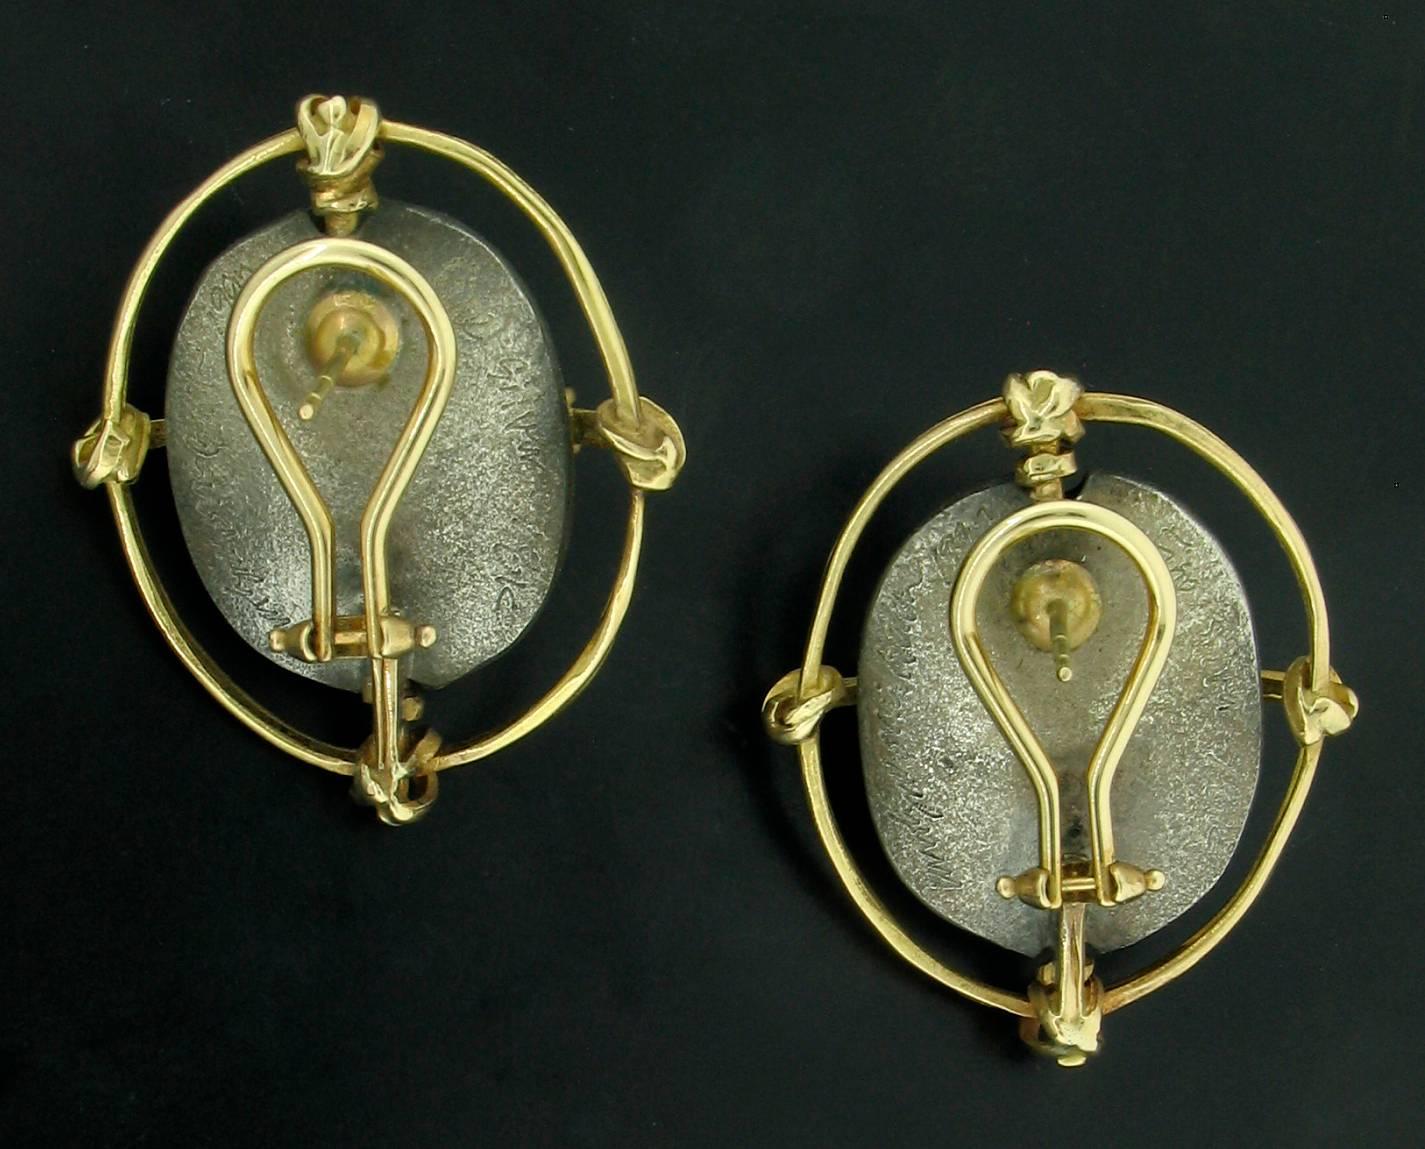 Original, hand made earrings by Designer Carolyn Morris Bach.  Beautiful Pearls approx 9mm in diameter are set in Carolyn's trademark gold and silver work.  These are set in 18k and Fine Silver.  Post backs with french clips.  Signed Carolyn Morris